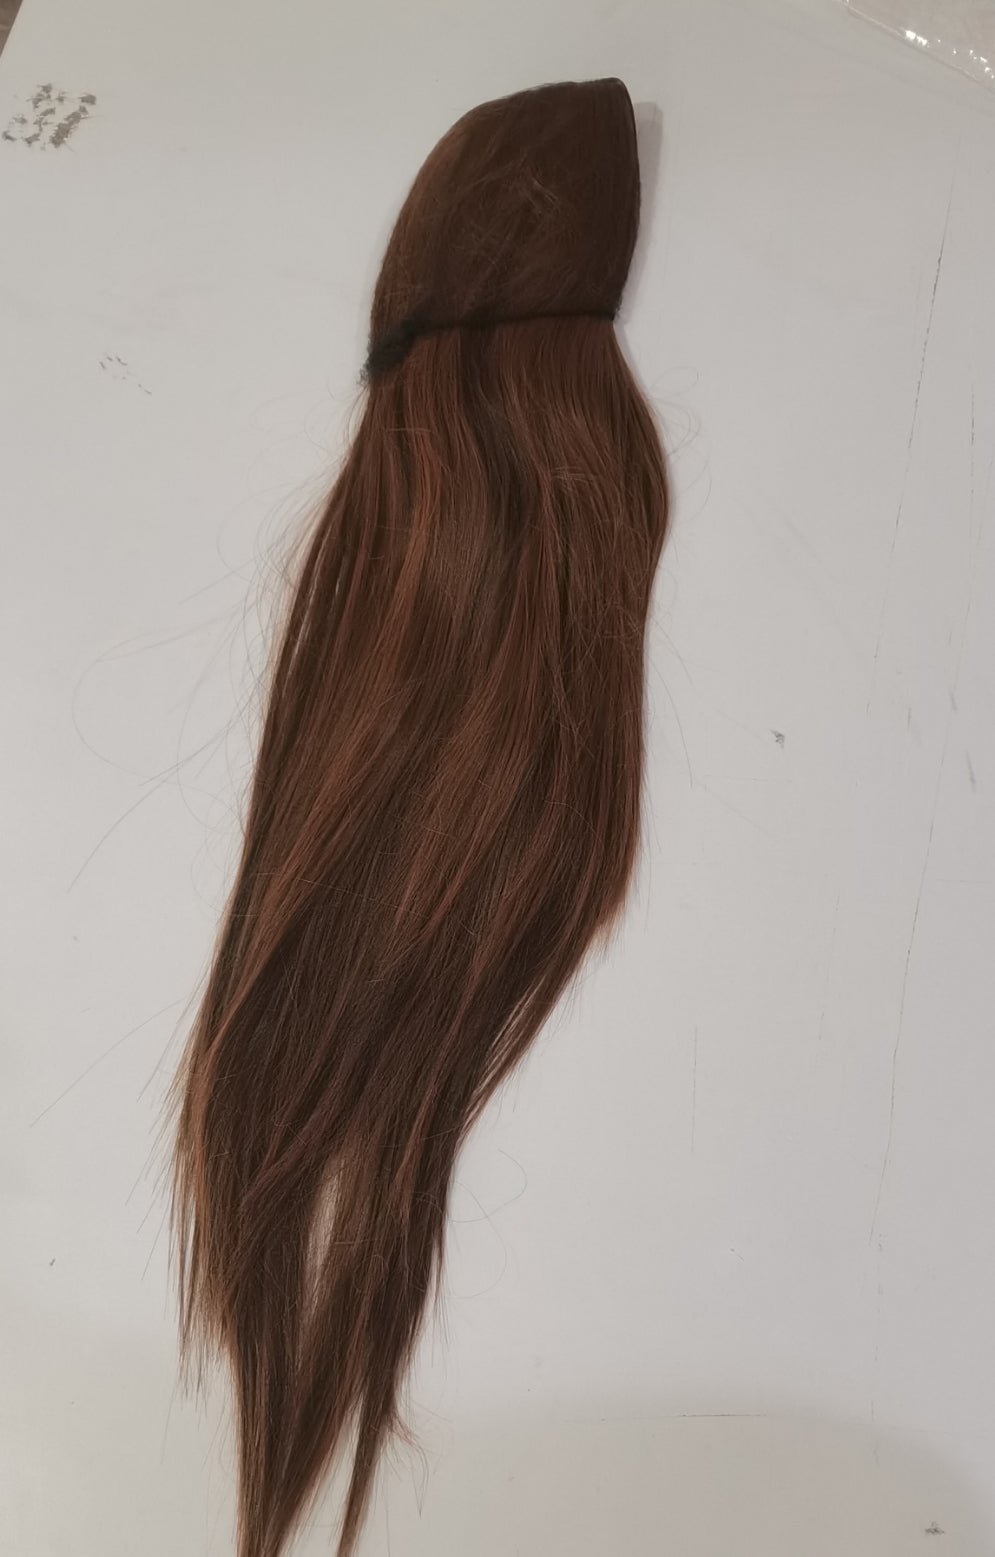 Black long straight hair wig cover